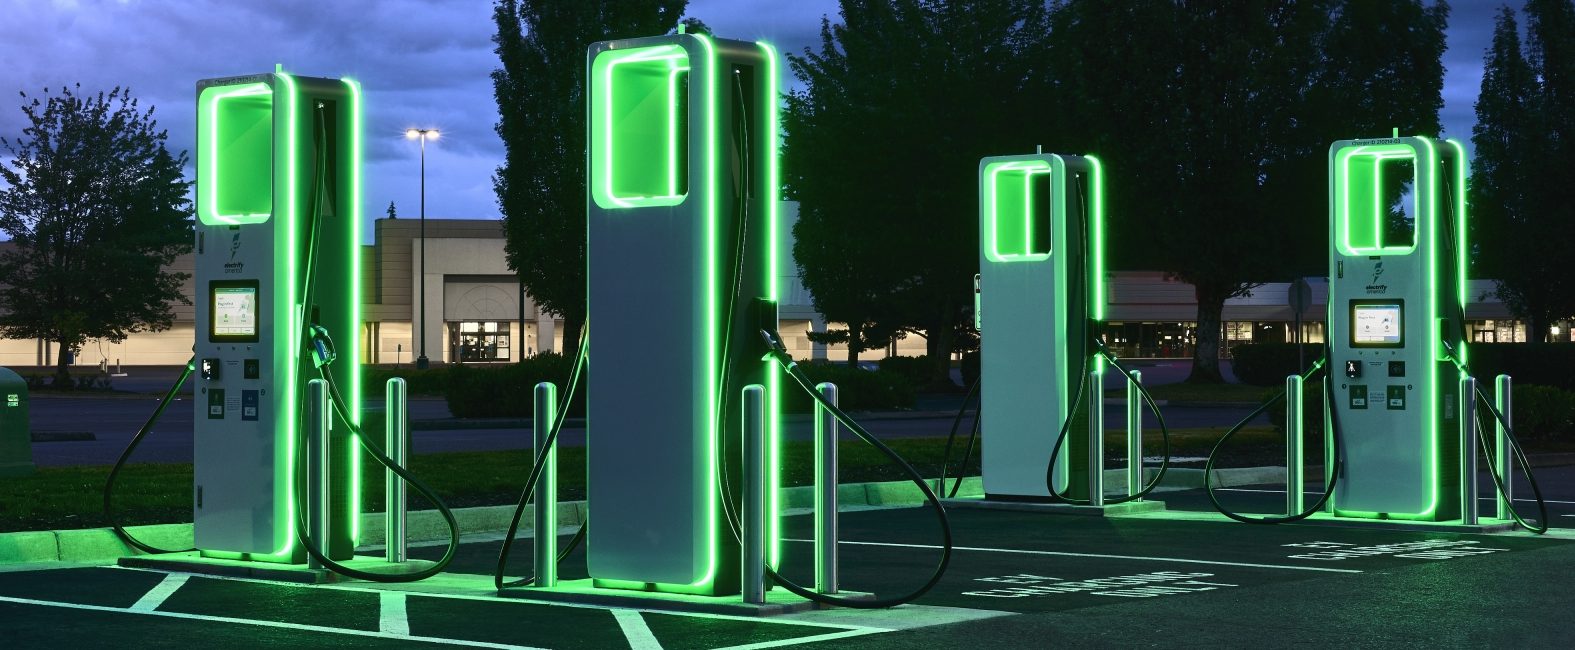 electrify america fast charger